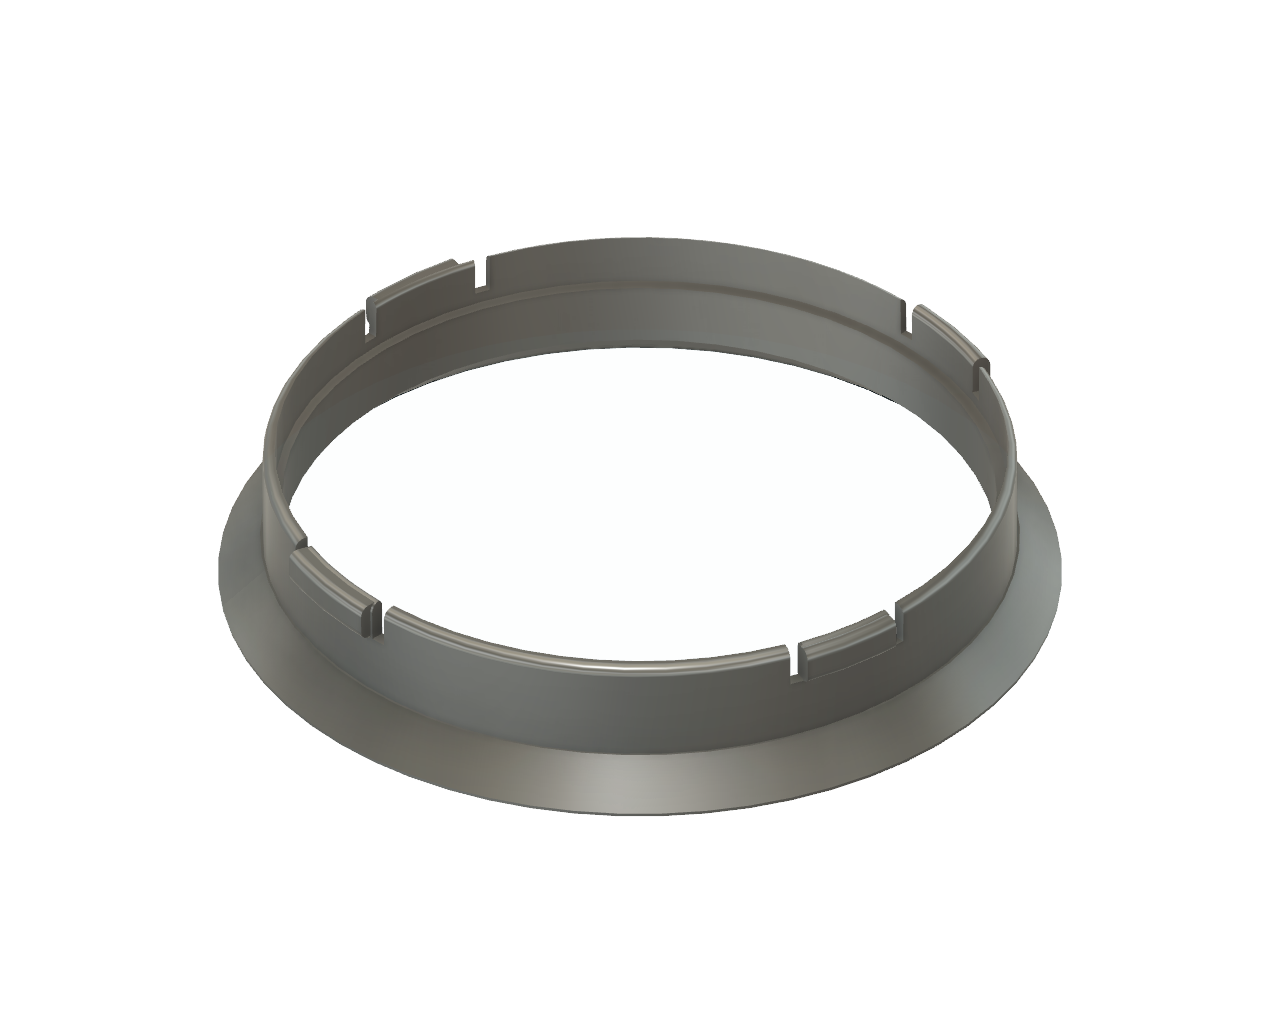 Center Ring from Ø70mm to 66.10mm